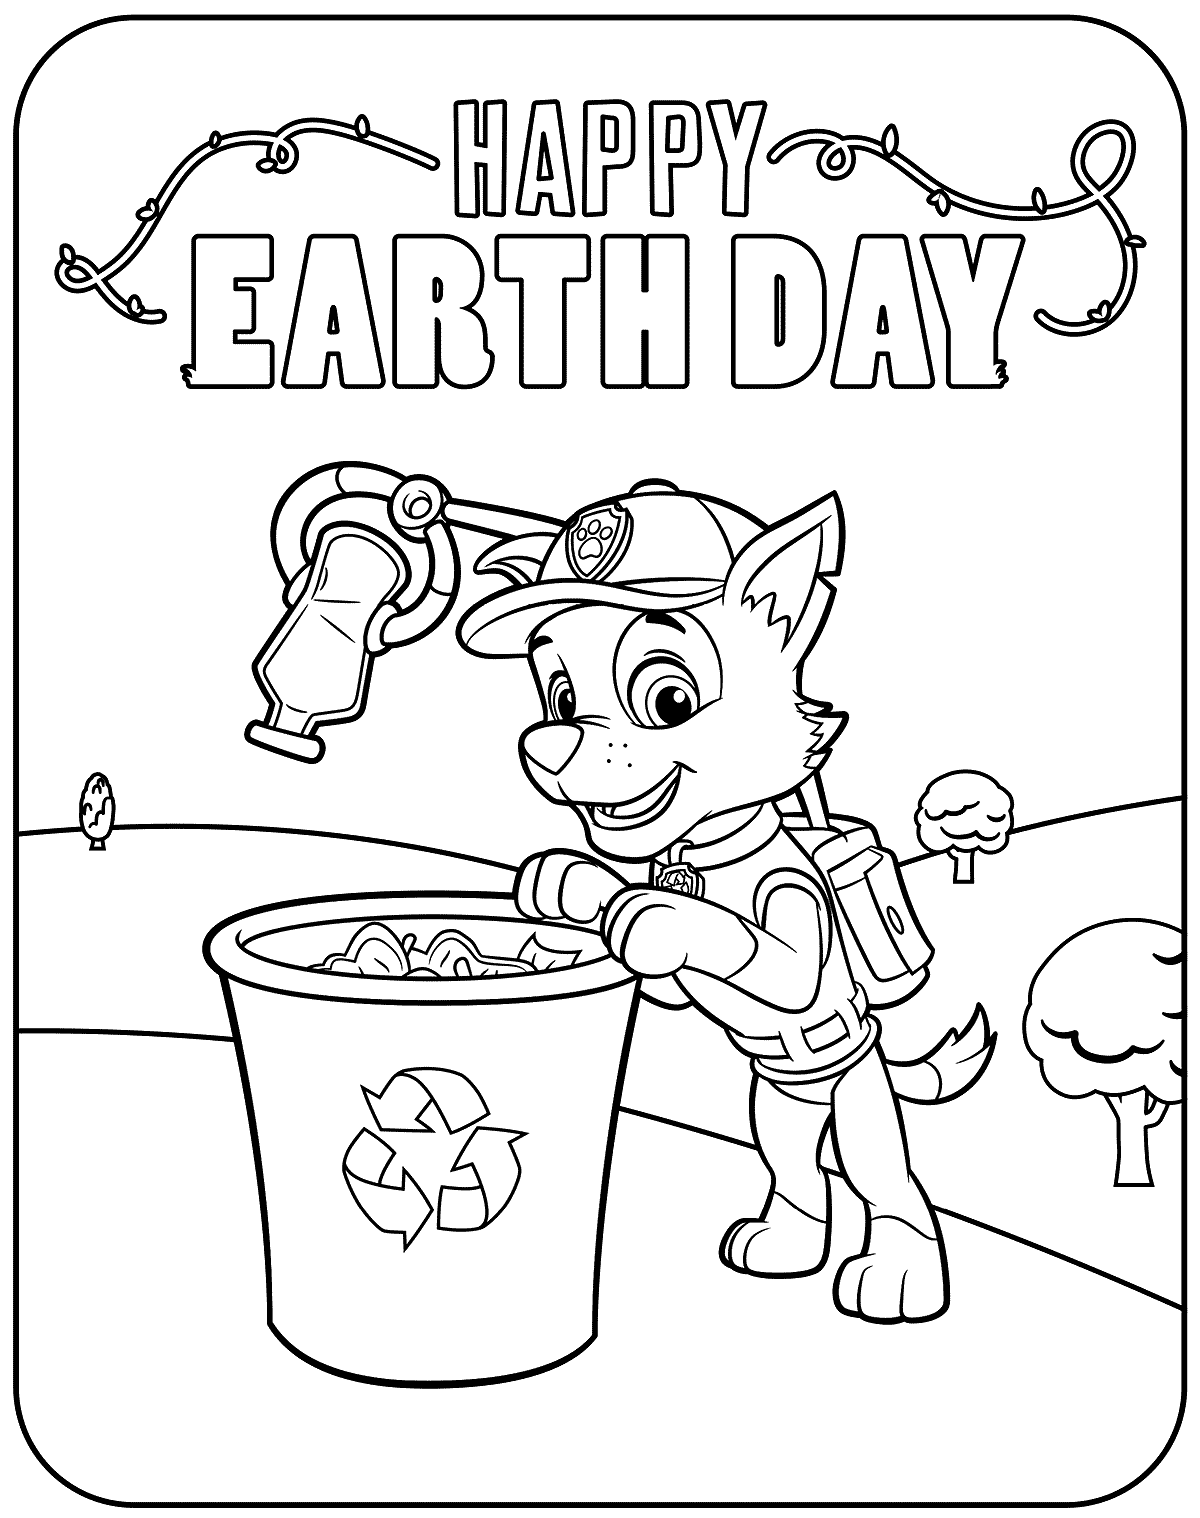 Happy Earth Day Coloring Page